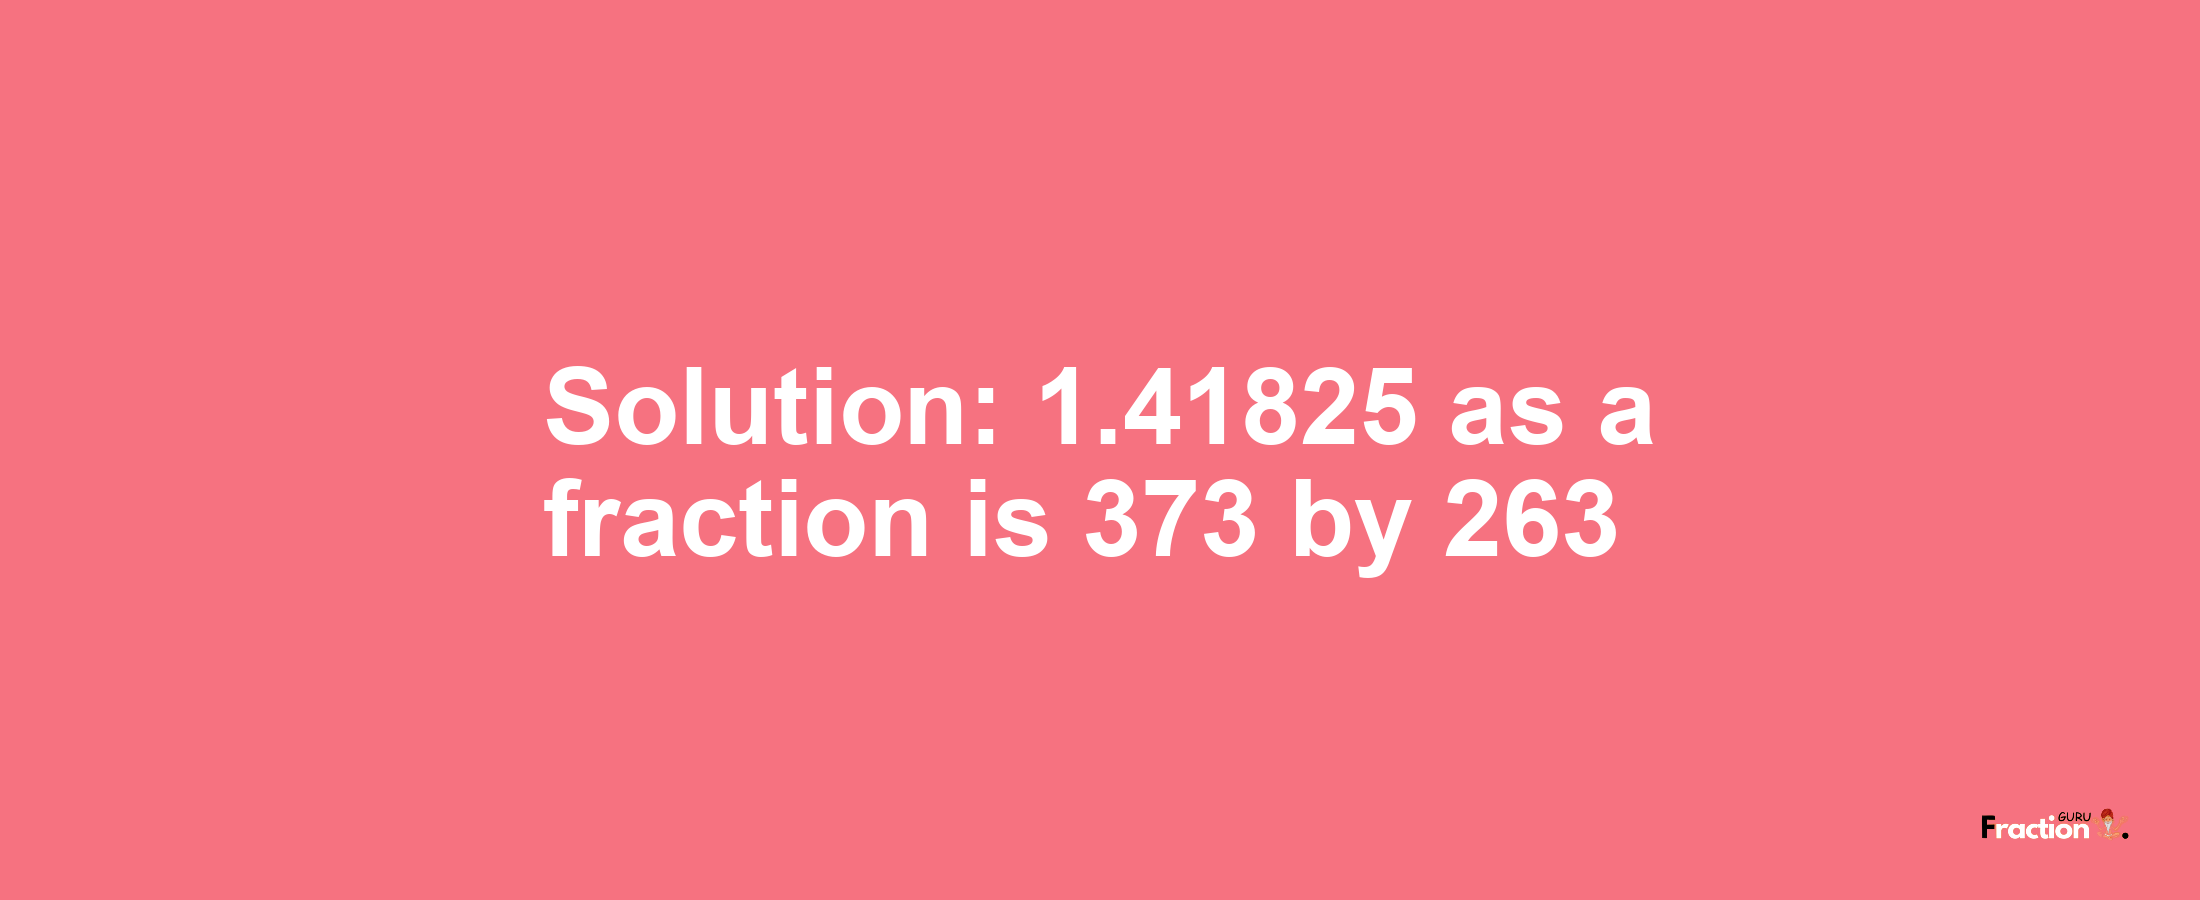 Solution:1.41825 as a fraction is 373/263